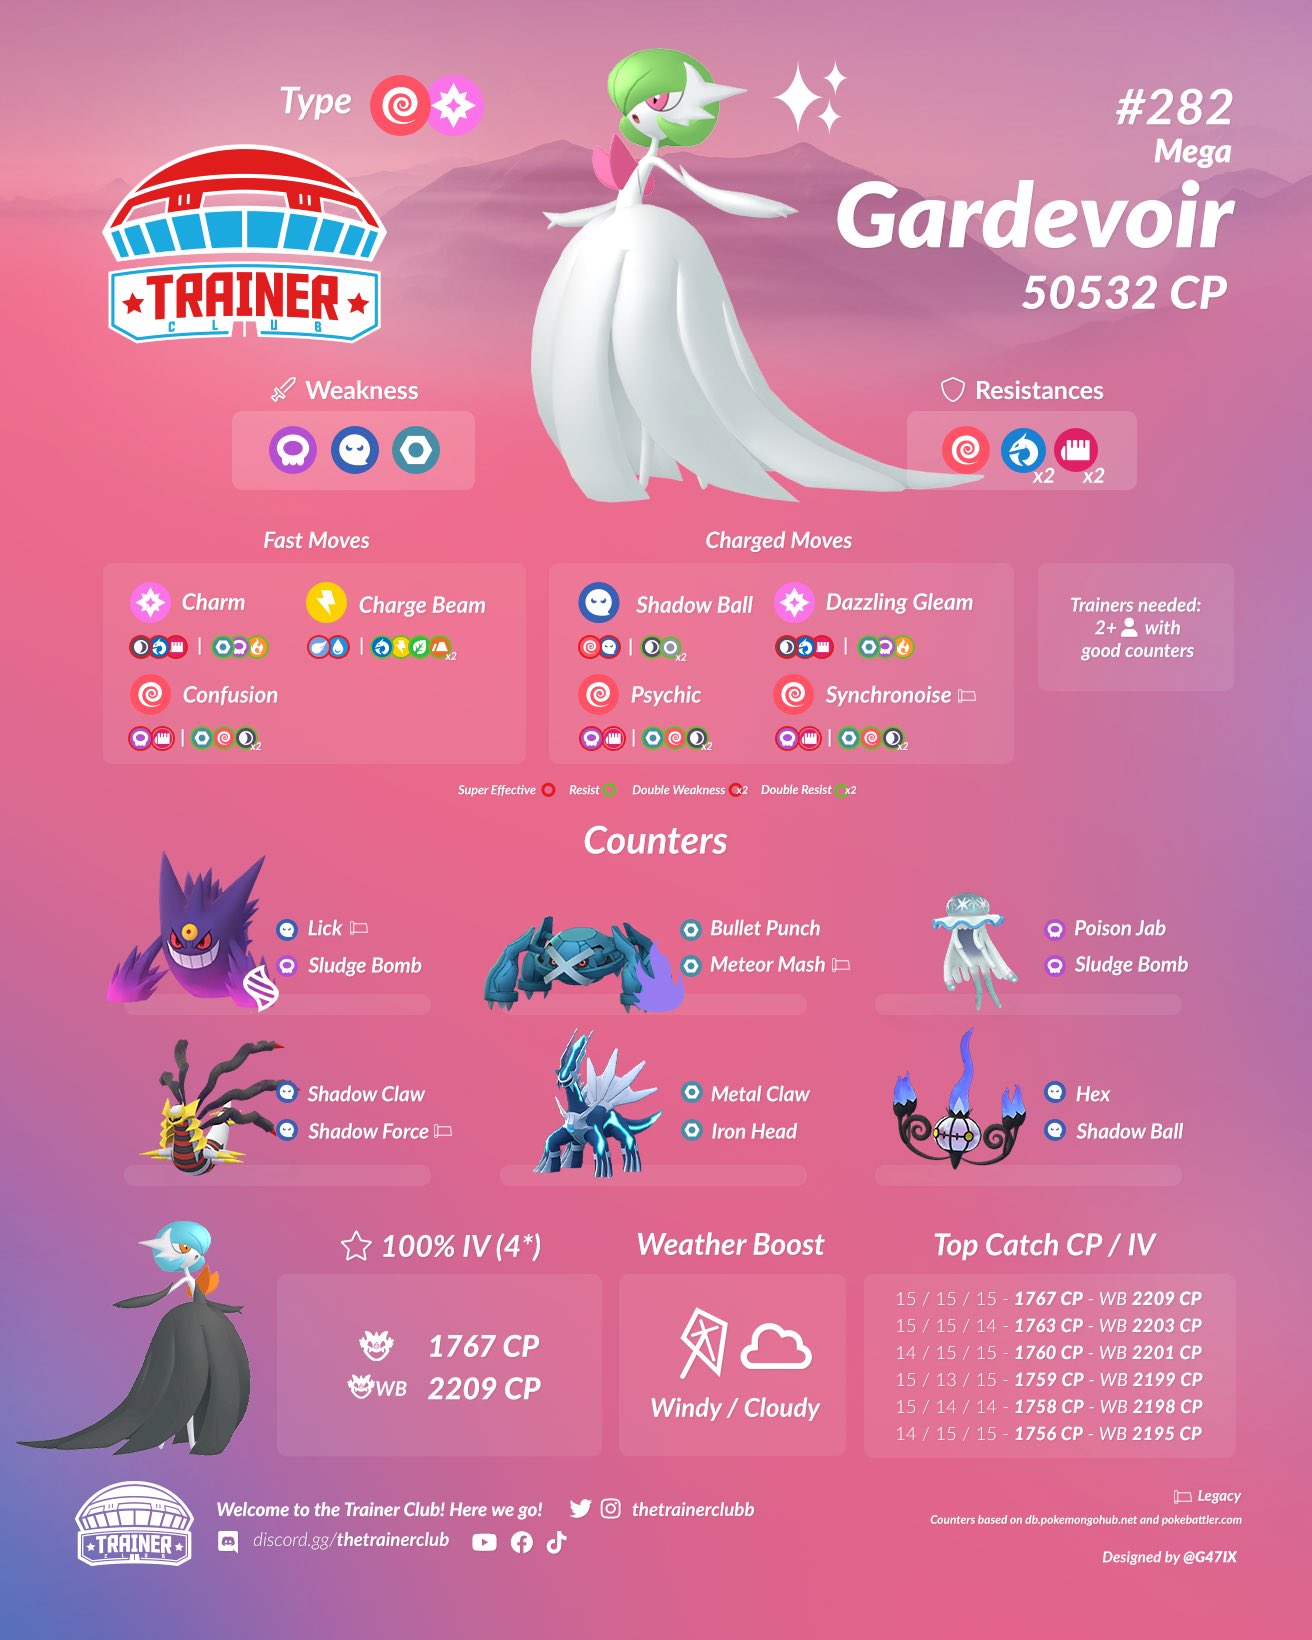 Pokemon GO Gardevoir PvP and PvE guide: Best moveset, counters